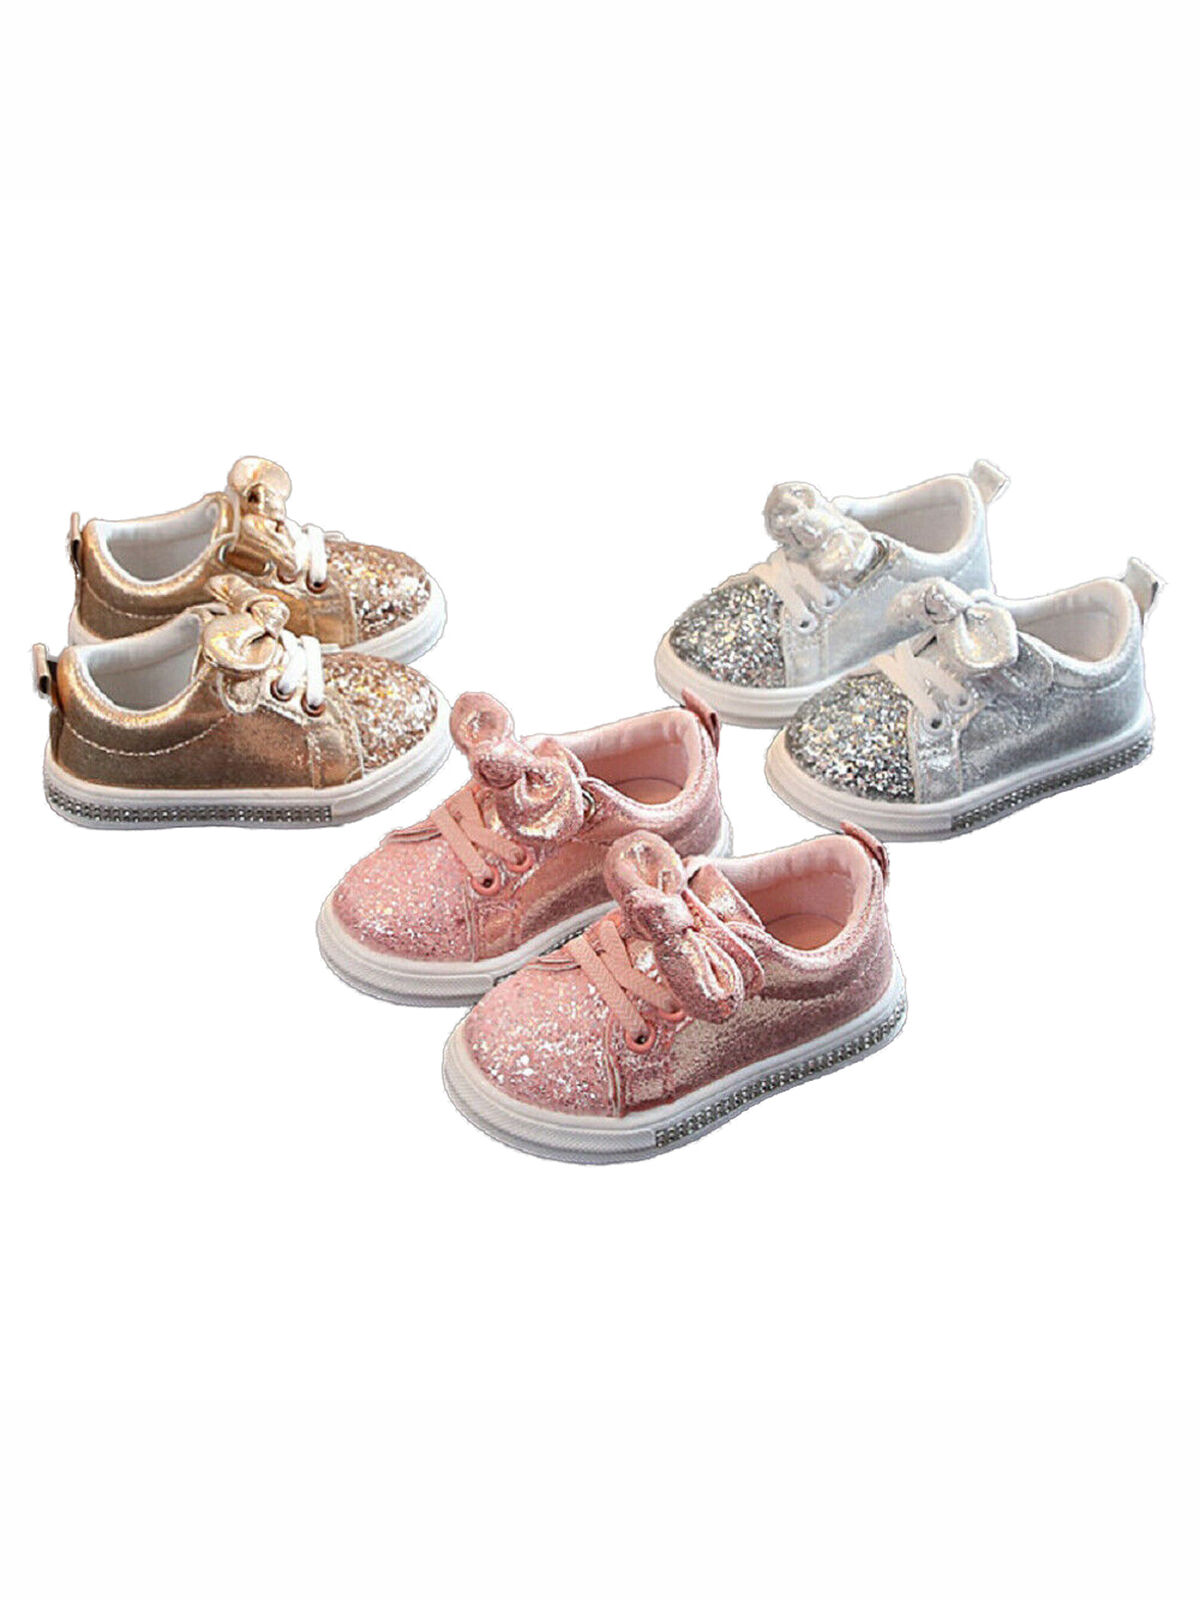 Cute Girls Casual Shoes Sneakers Toddler Baby Girls Bow Sequin Crib Trend Casual Shoes Kids Children Anti Slip Pink Dress Shoes - image 1 of 6